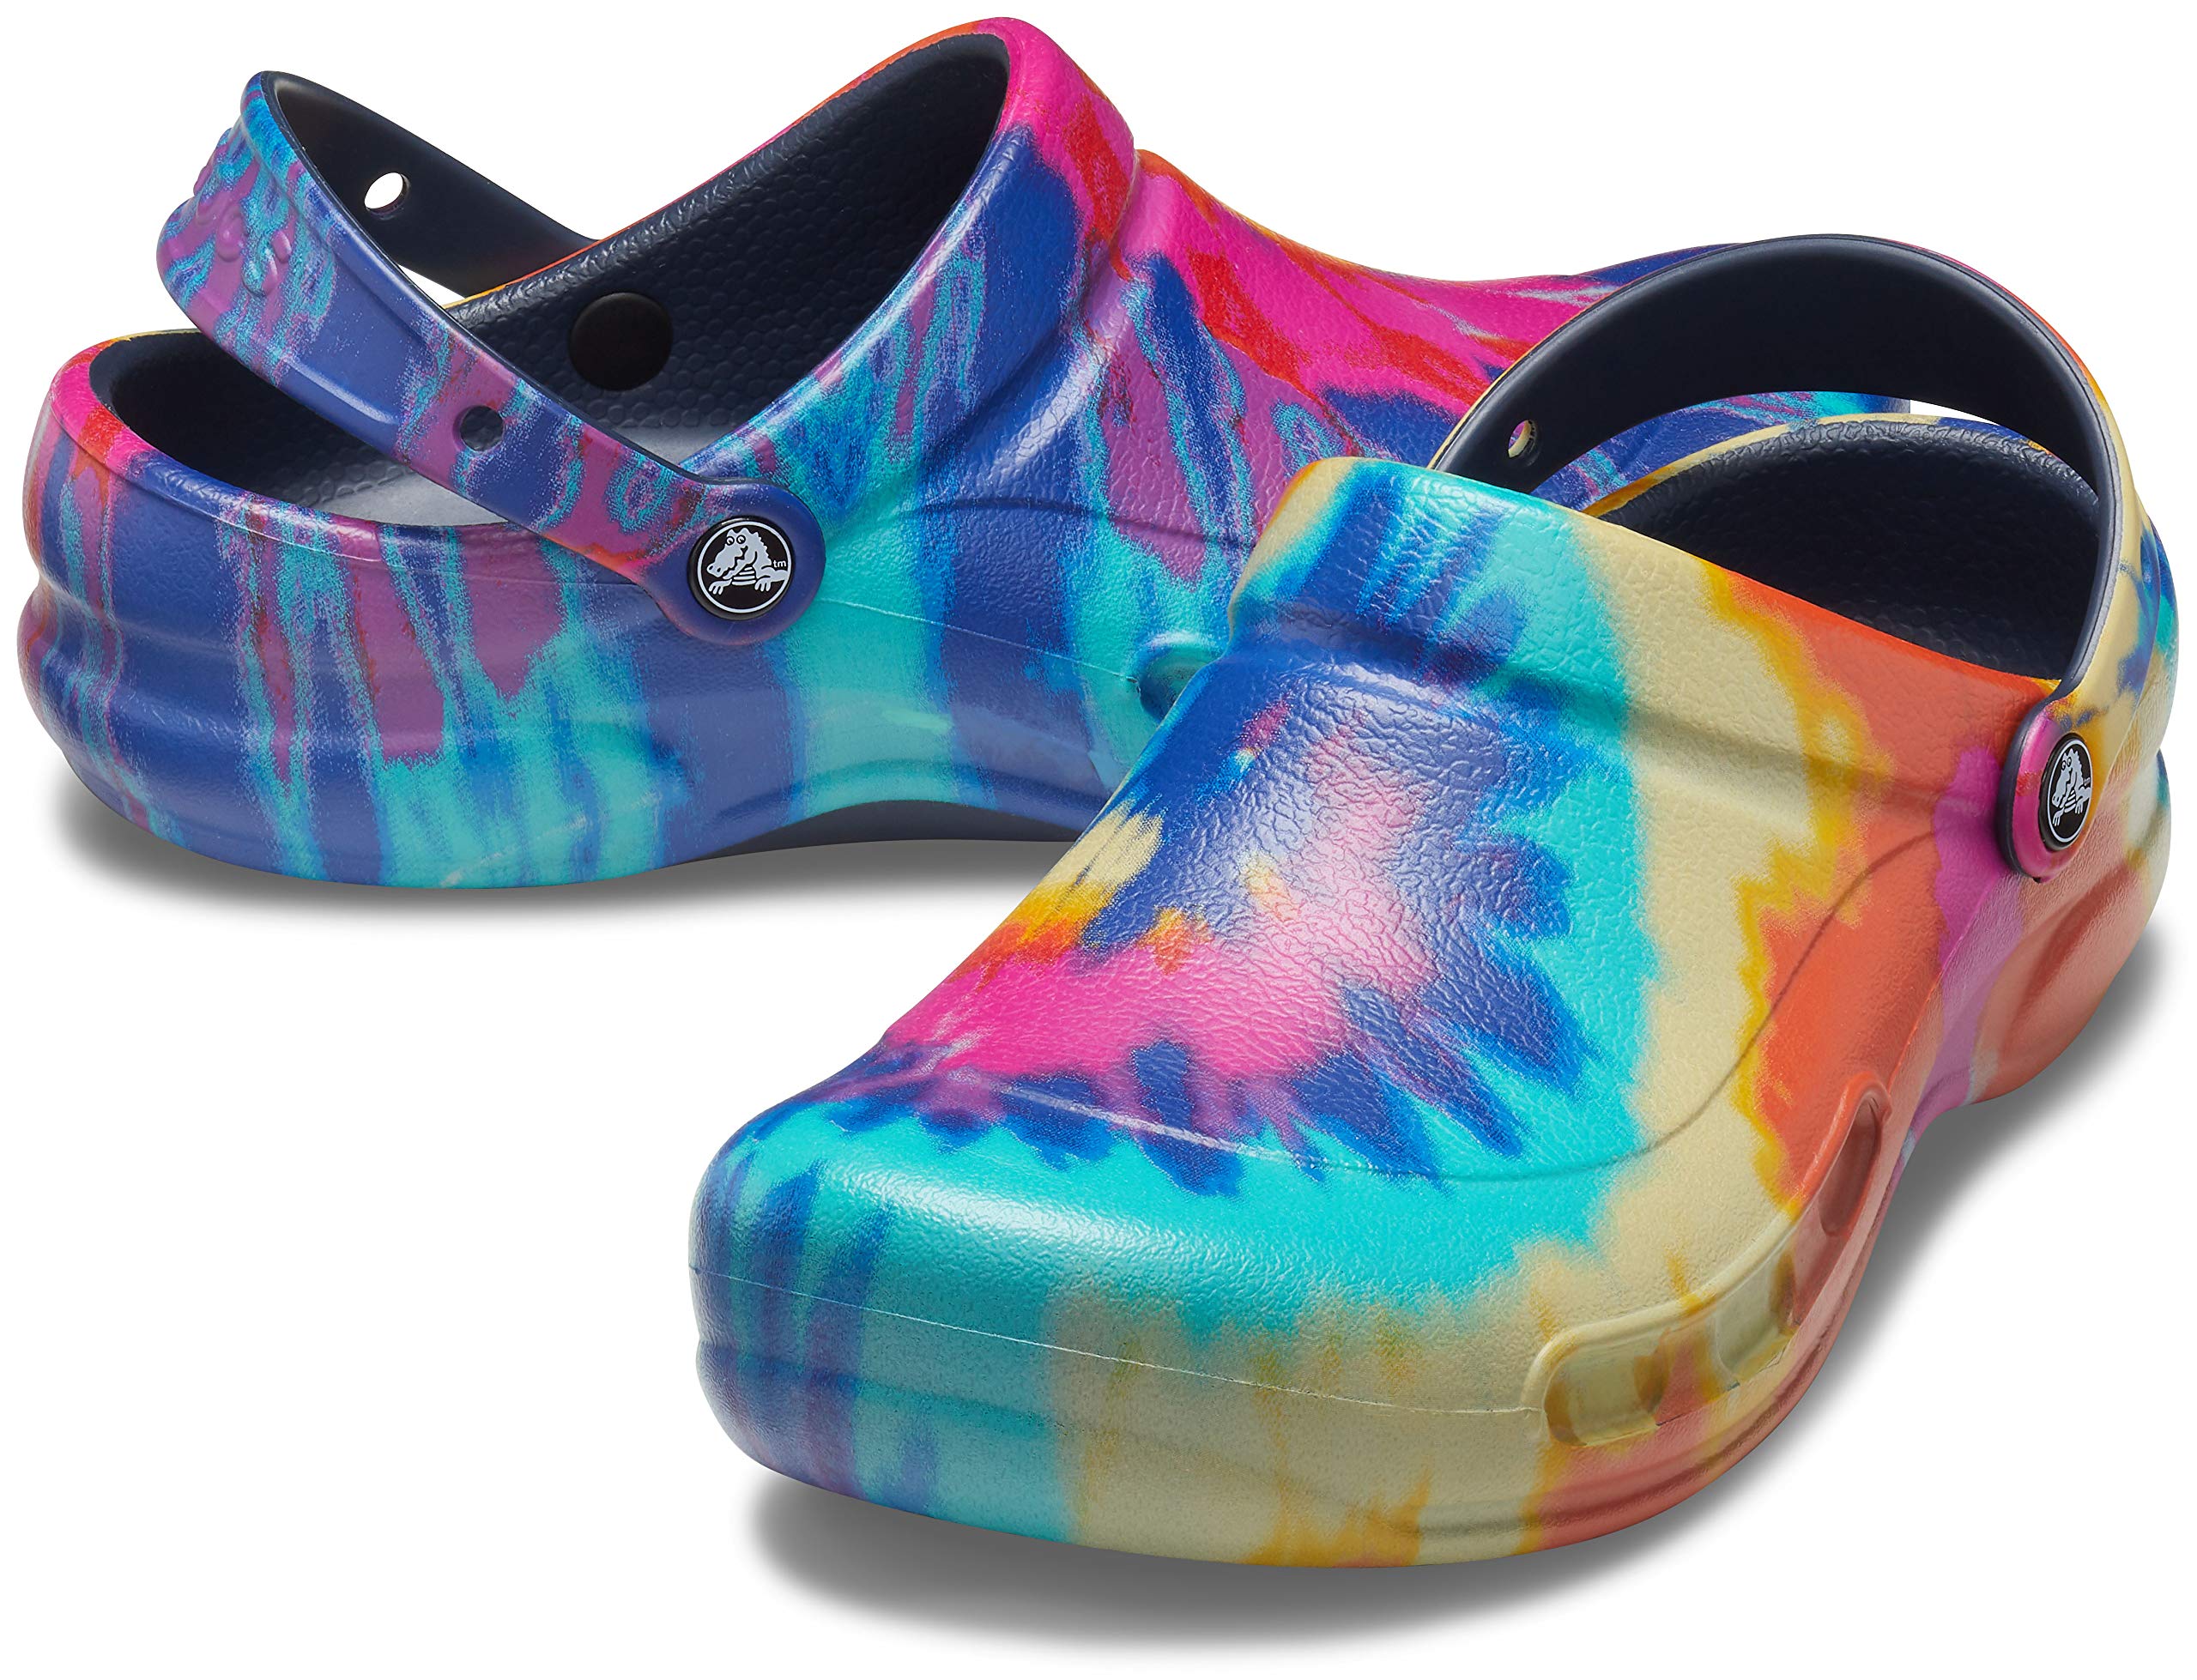 Crocs Unisex-Adult Slip Resistant Bistro Clogs (Size 4-17, Tie Dye/Navy) $20.87 + Free Shipping w/ Prime or on $35+